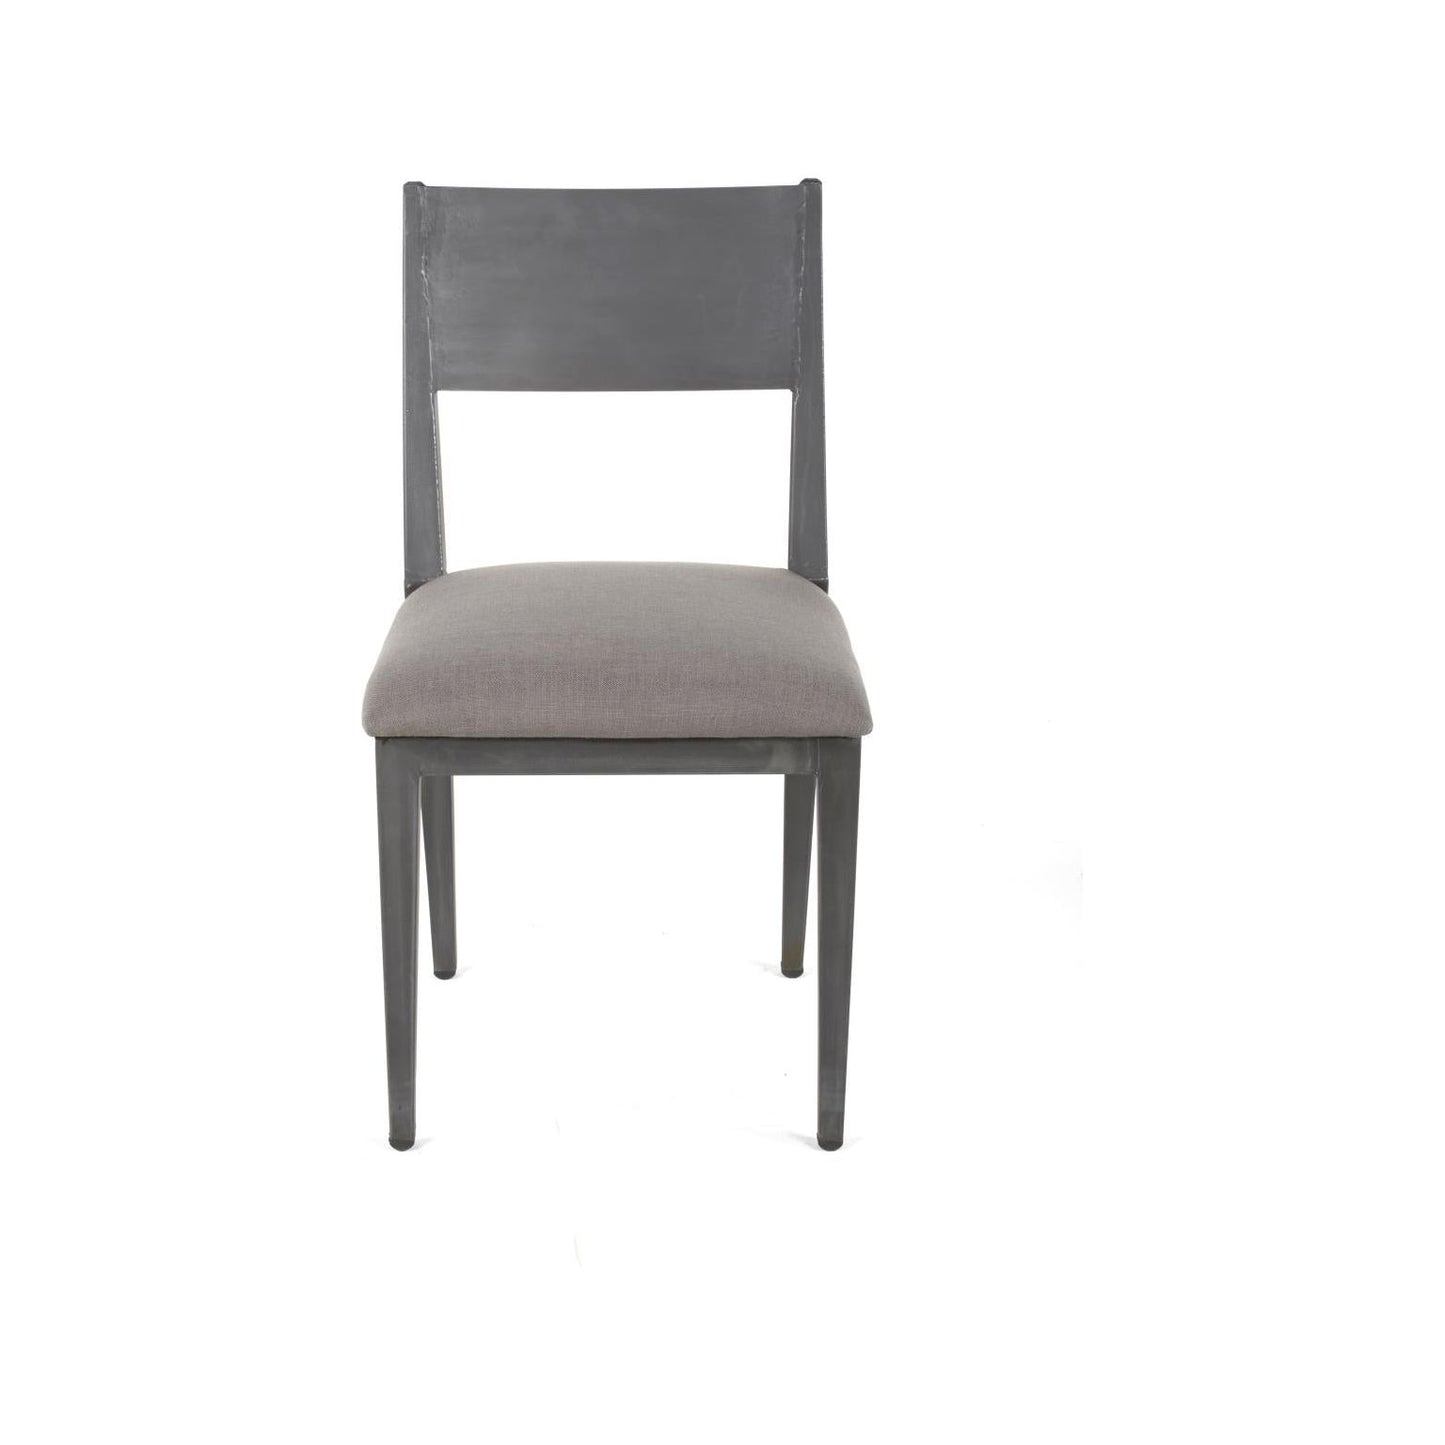 A modern, minimalist gray upholstered Aubrey Metal Dining Chair with a dark gray, high-backrest made of solid material and a light gray cushioned seat. The black iron Aubrey Metal Dining Chair features four straight legs, slightly tapered and also dark gray, all set against a plain white background.